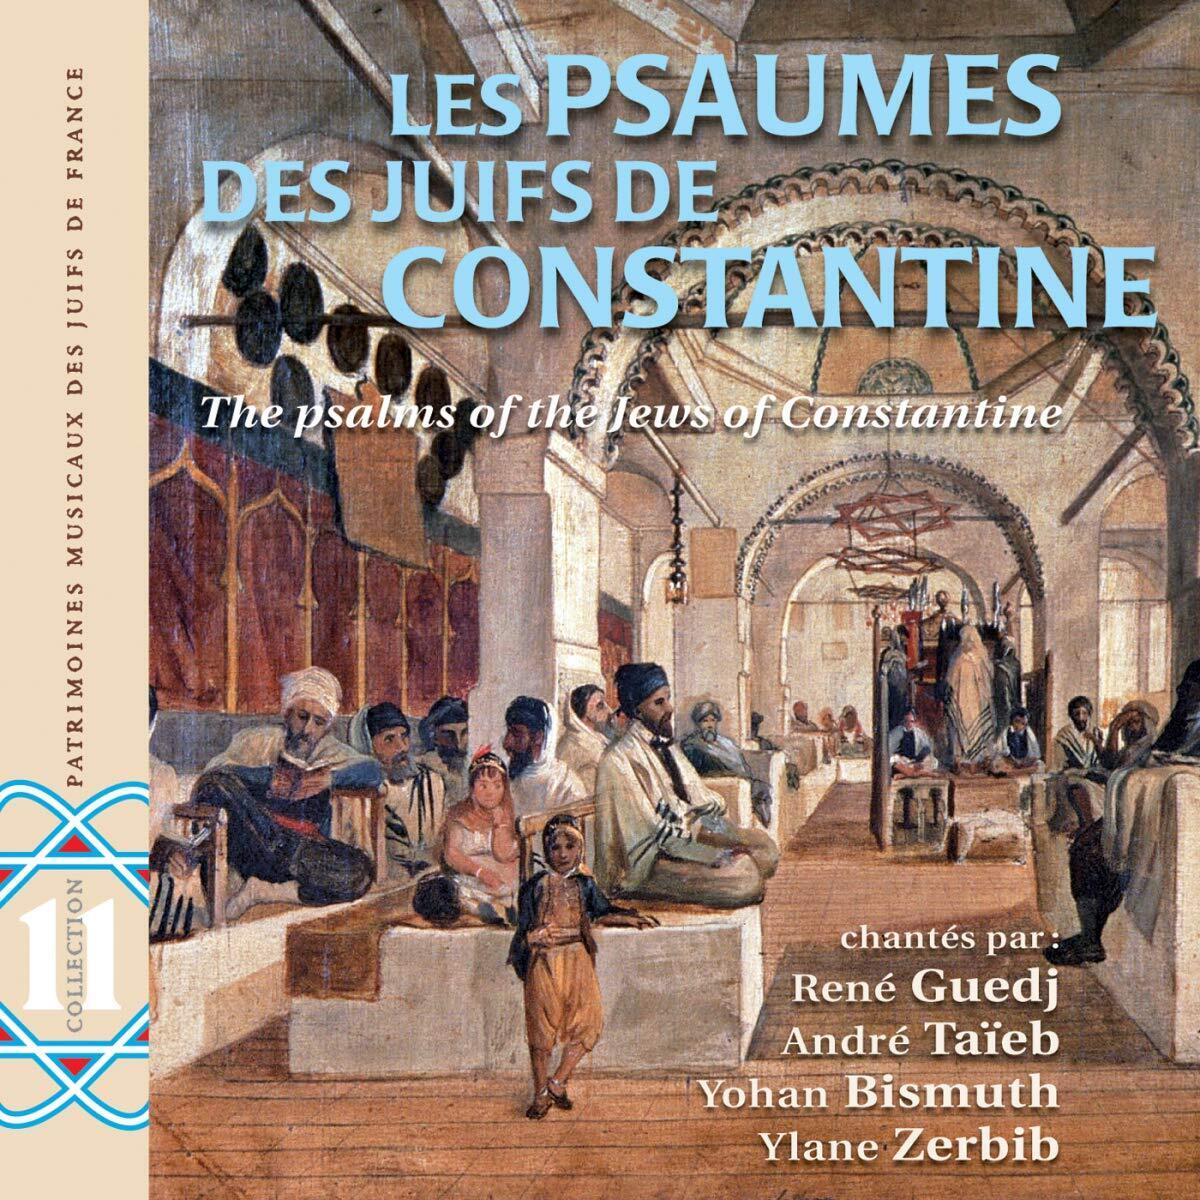 The Psalms of the Jews of Constantine [Audio CD] Guedj, Rene